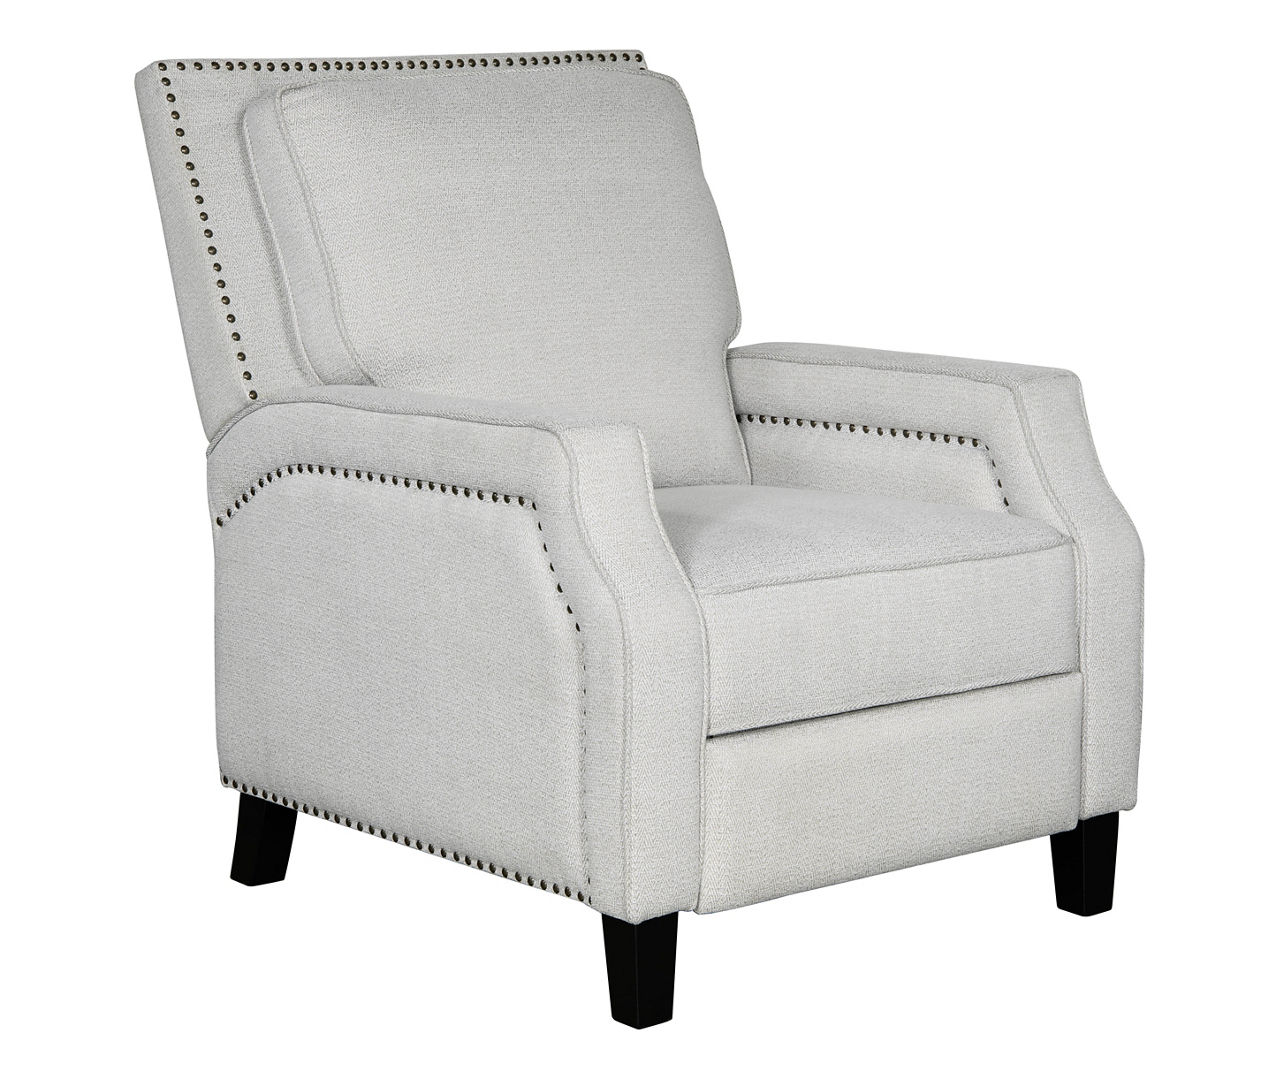 Portico Marble Push Back Recliner